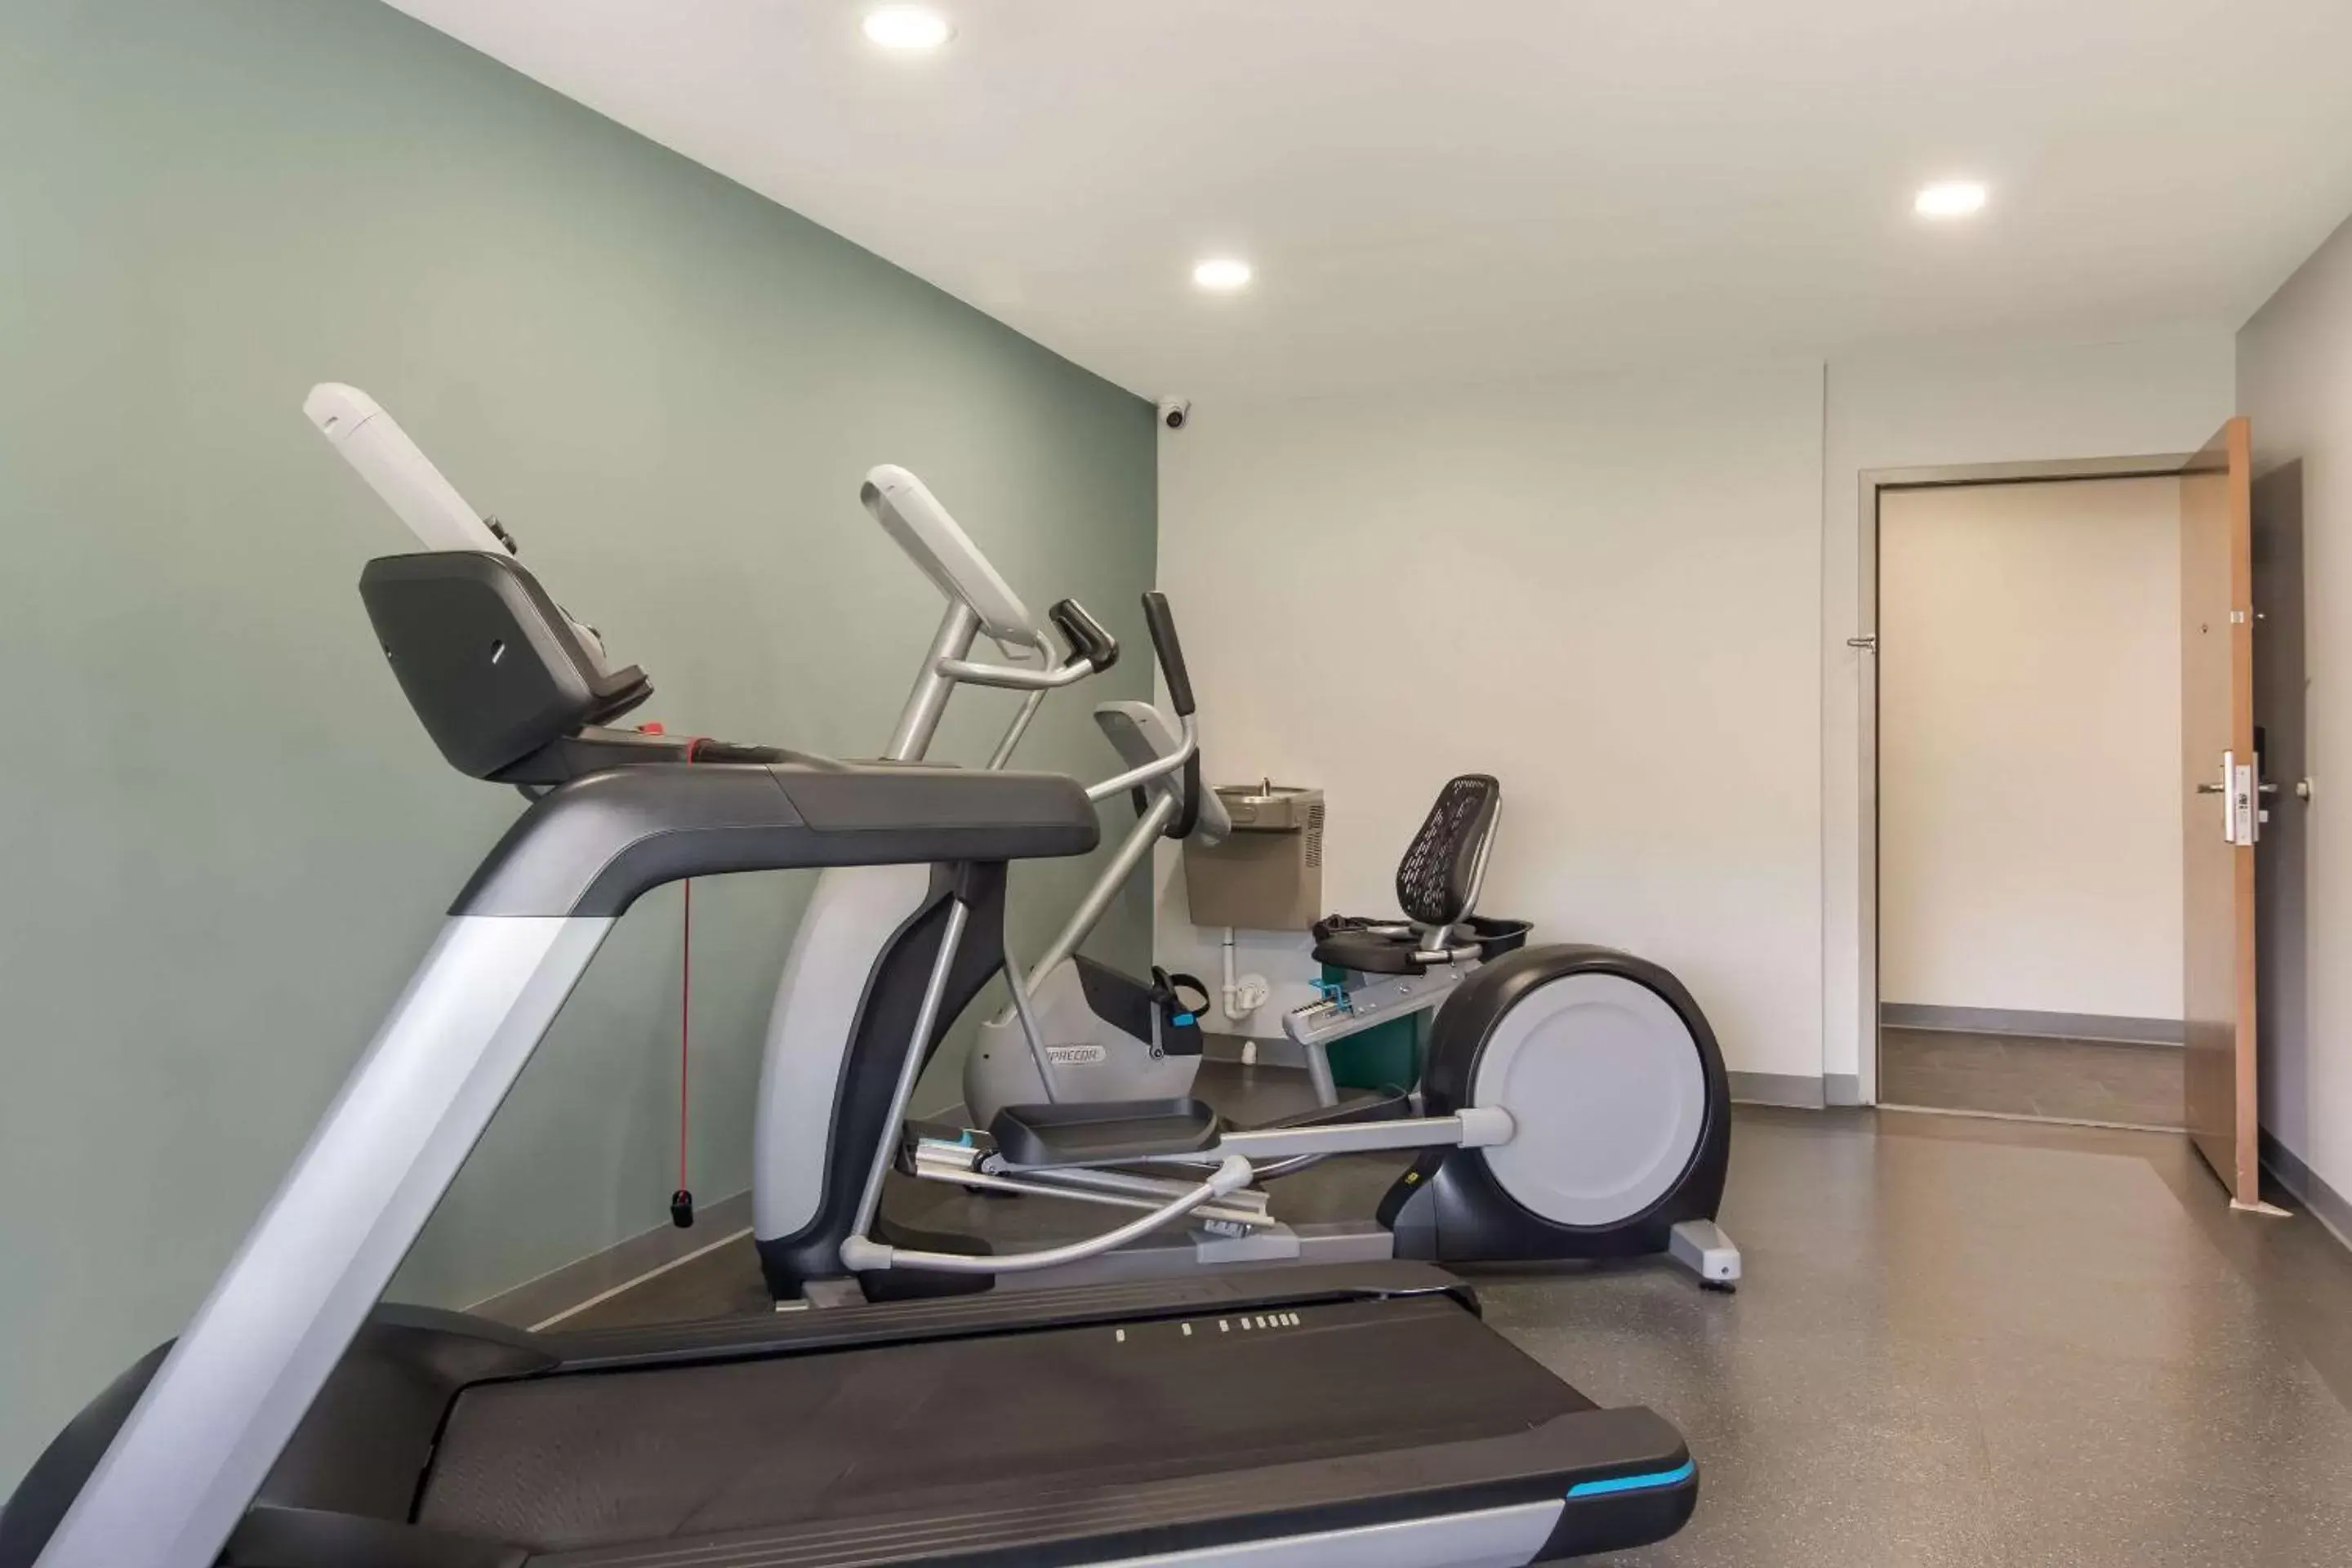 Fitness centre/facilities, Fitness Center/Facilities in MainStay Suites Clarion, PA near I-80